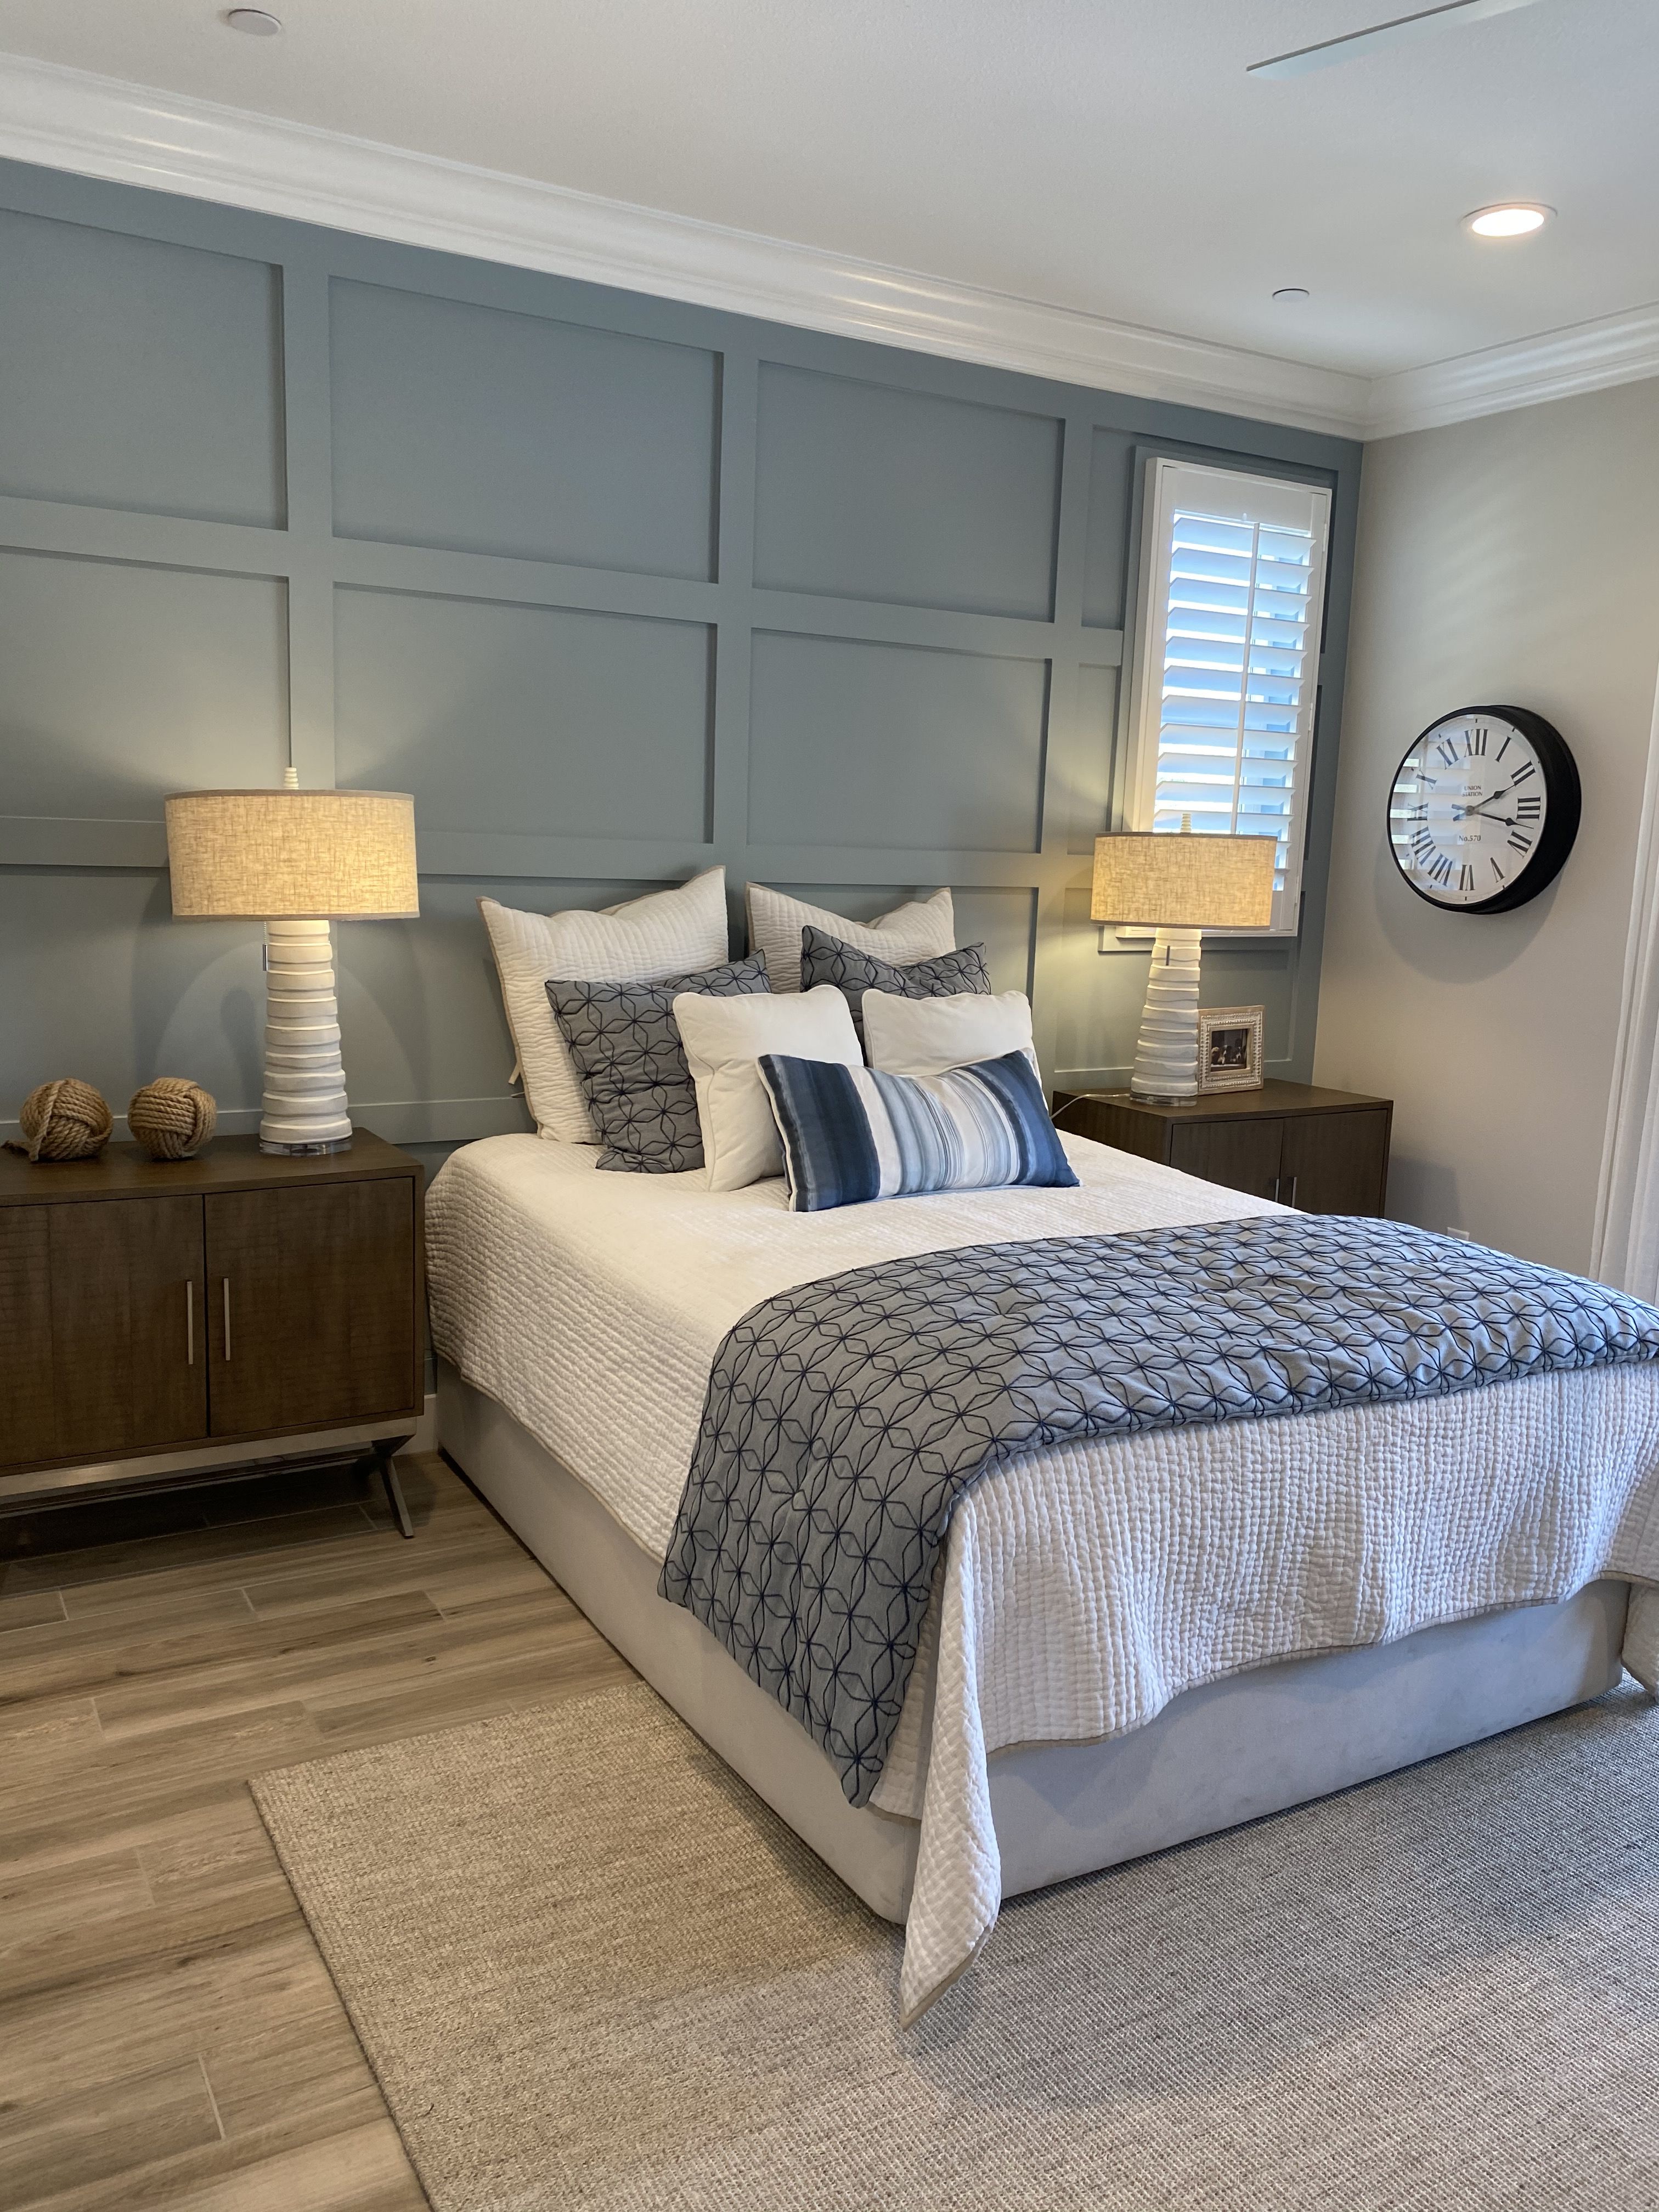 Textures And Patterns: Incorporating Depth And Style Into Your Bedroom Accent Wall